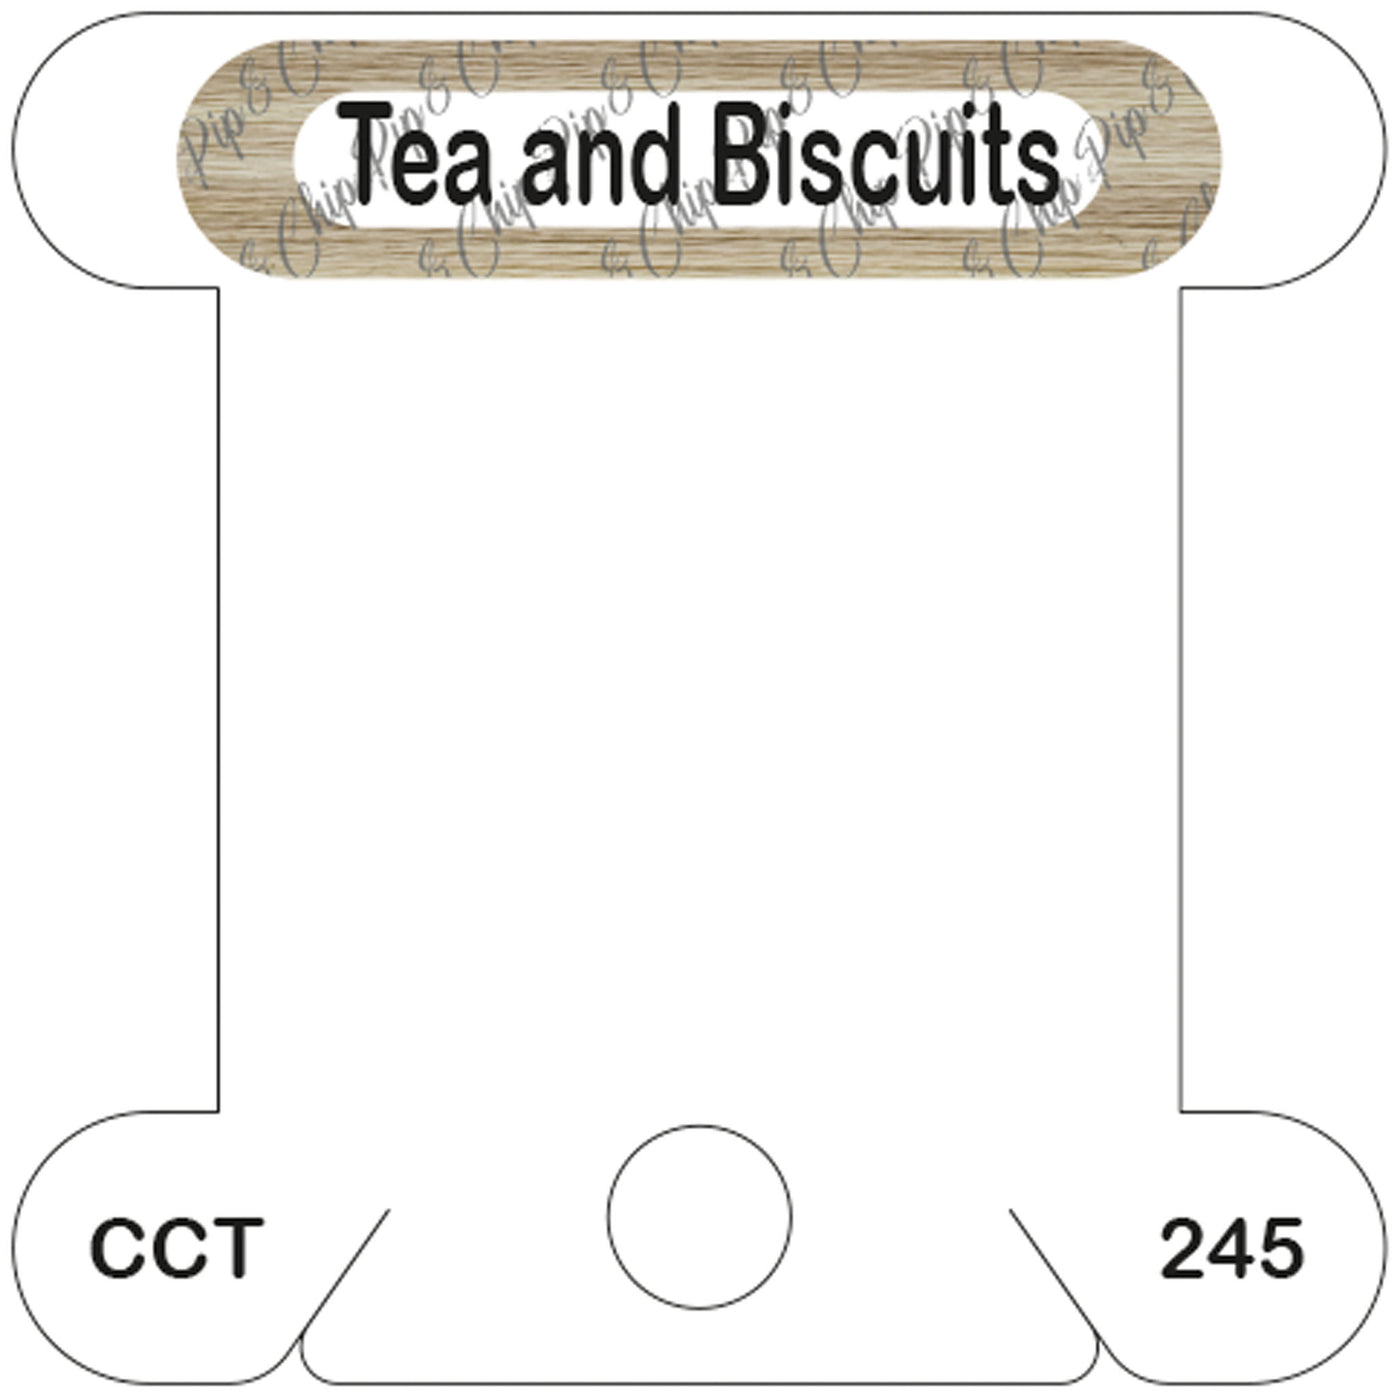 Classic Colorworks Tea and Biscuits acrylic bobbin